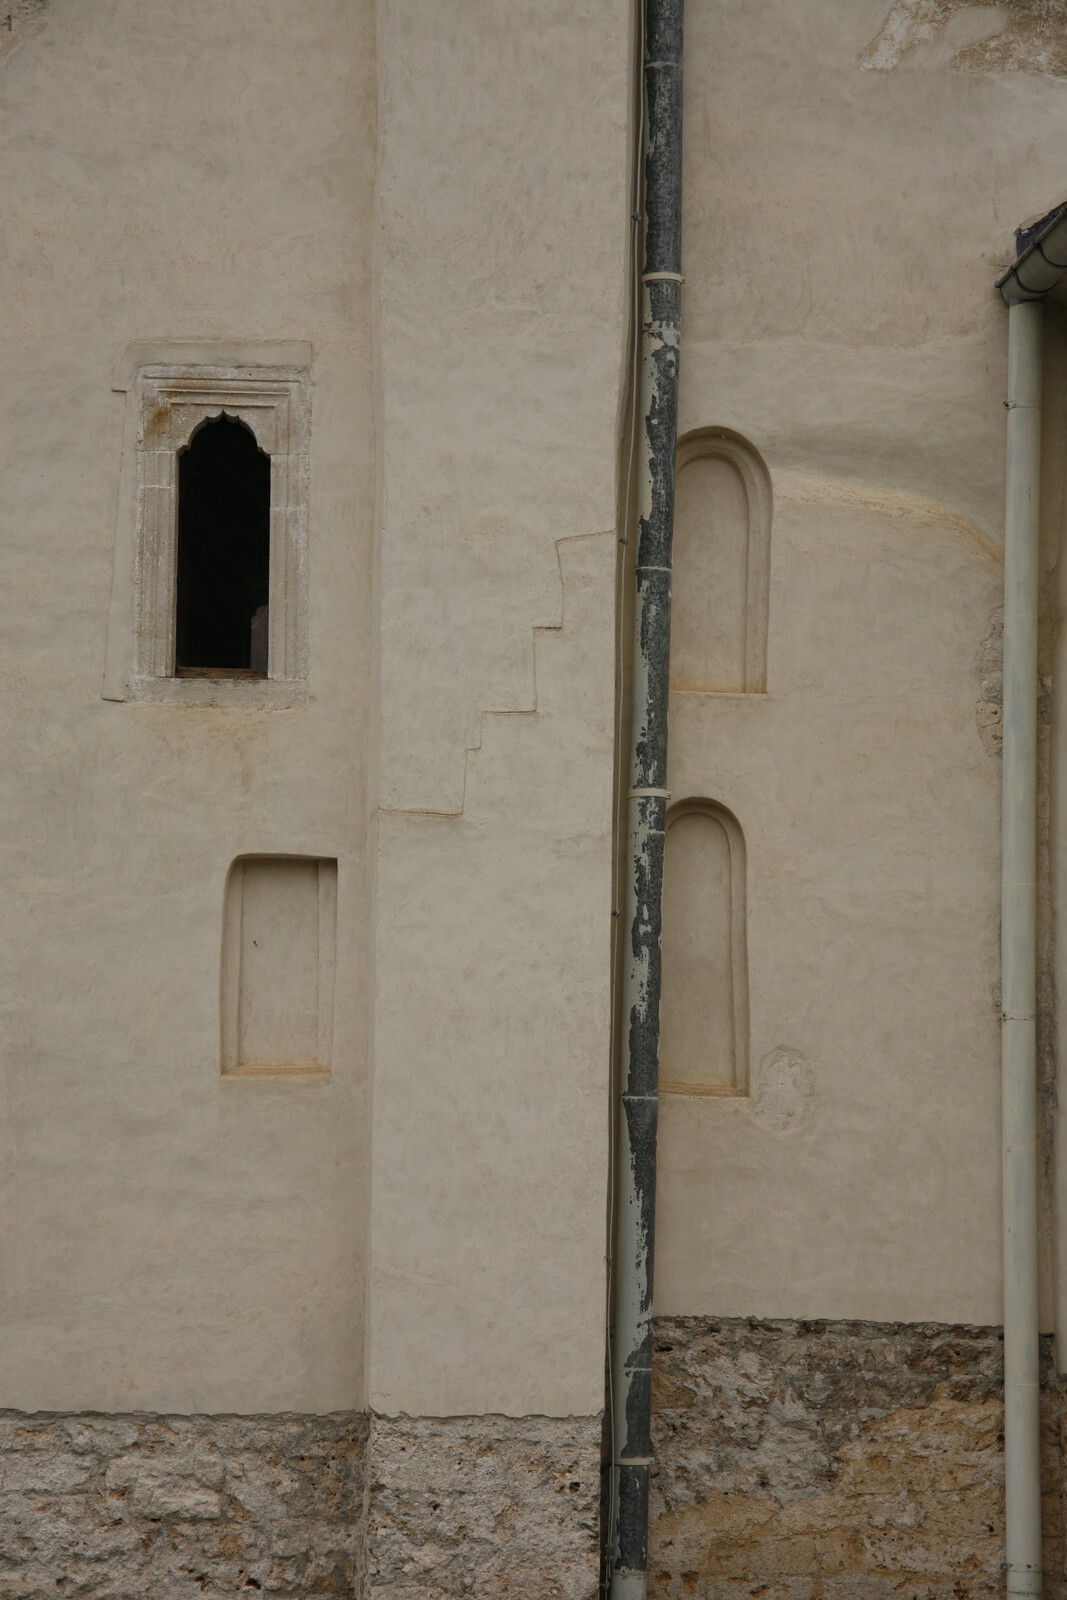 Window and niches on the southern wall of the narthex